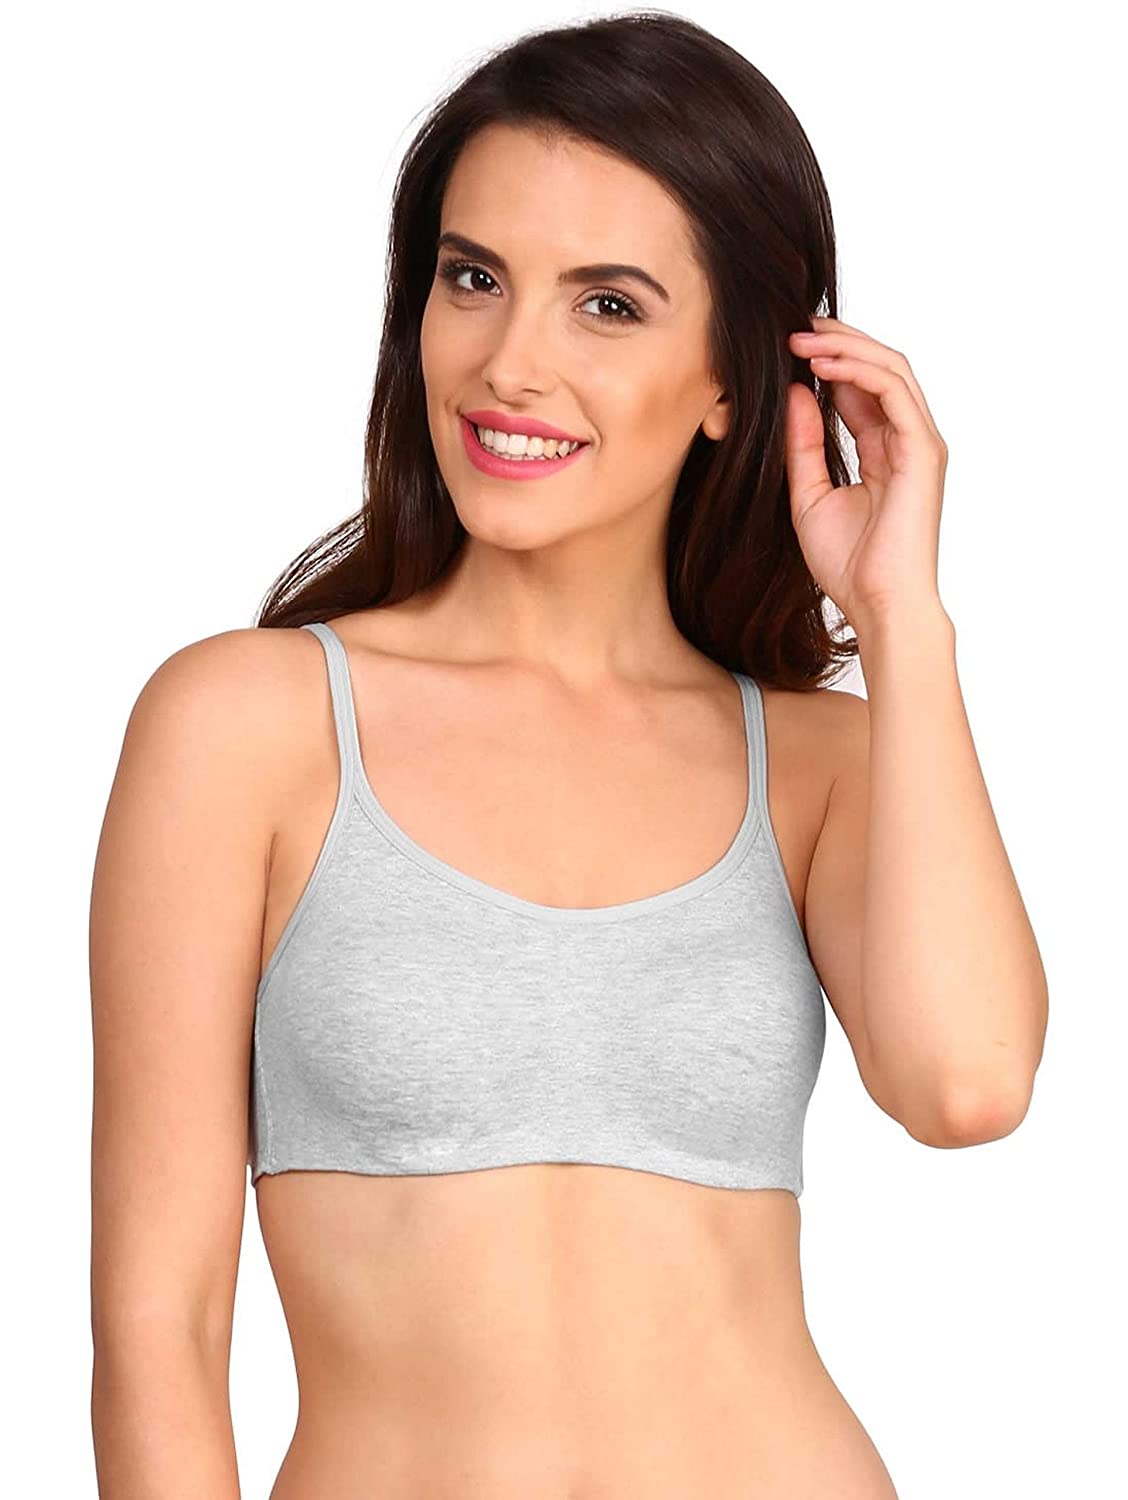 What is the best price for a sports bra for women online? - Quora